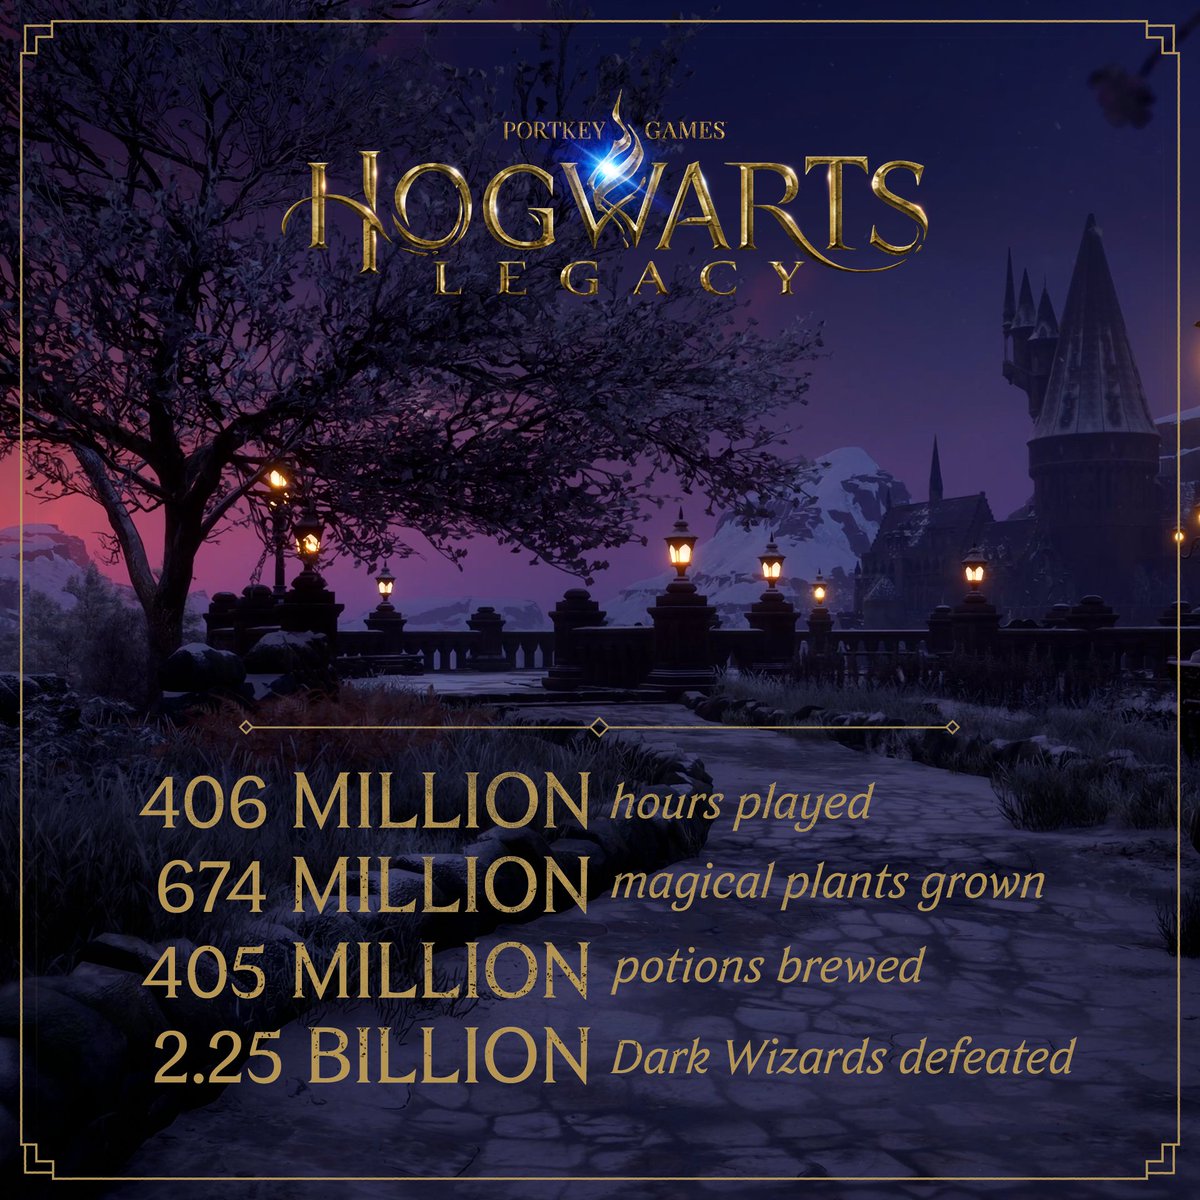 Merlin's beard! An enormous THANK YOU to everyone who has shared in the magic of Hogwarts Legacy.